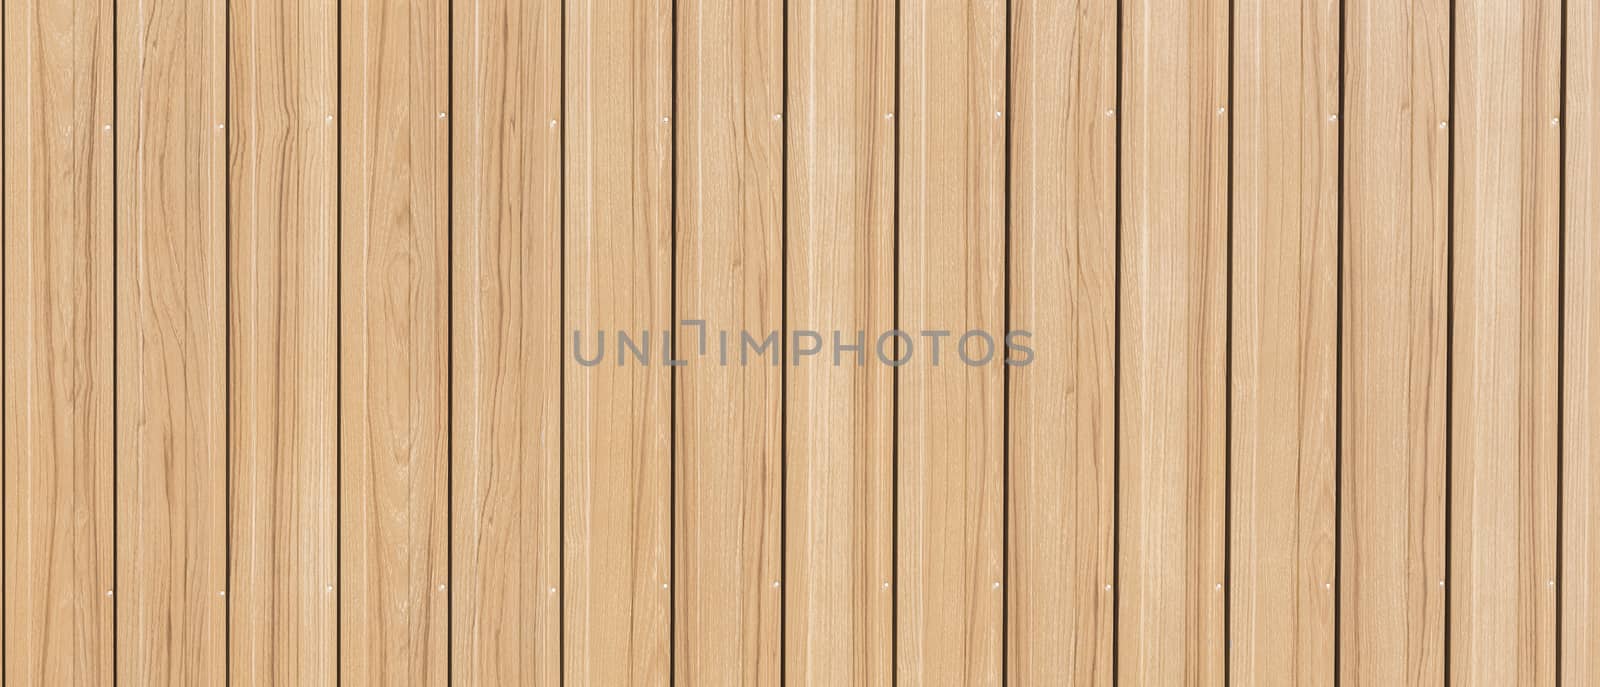 Panorama wood plank background and texture